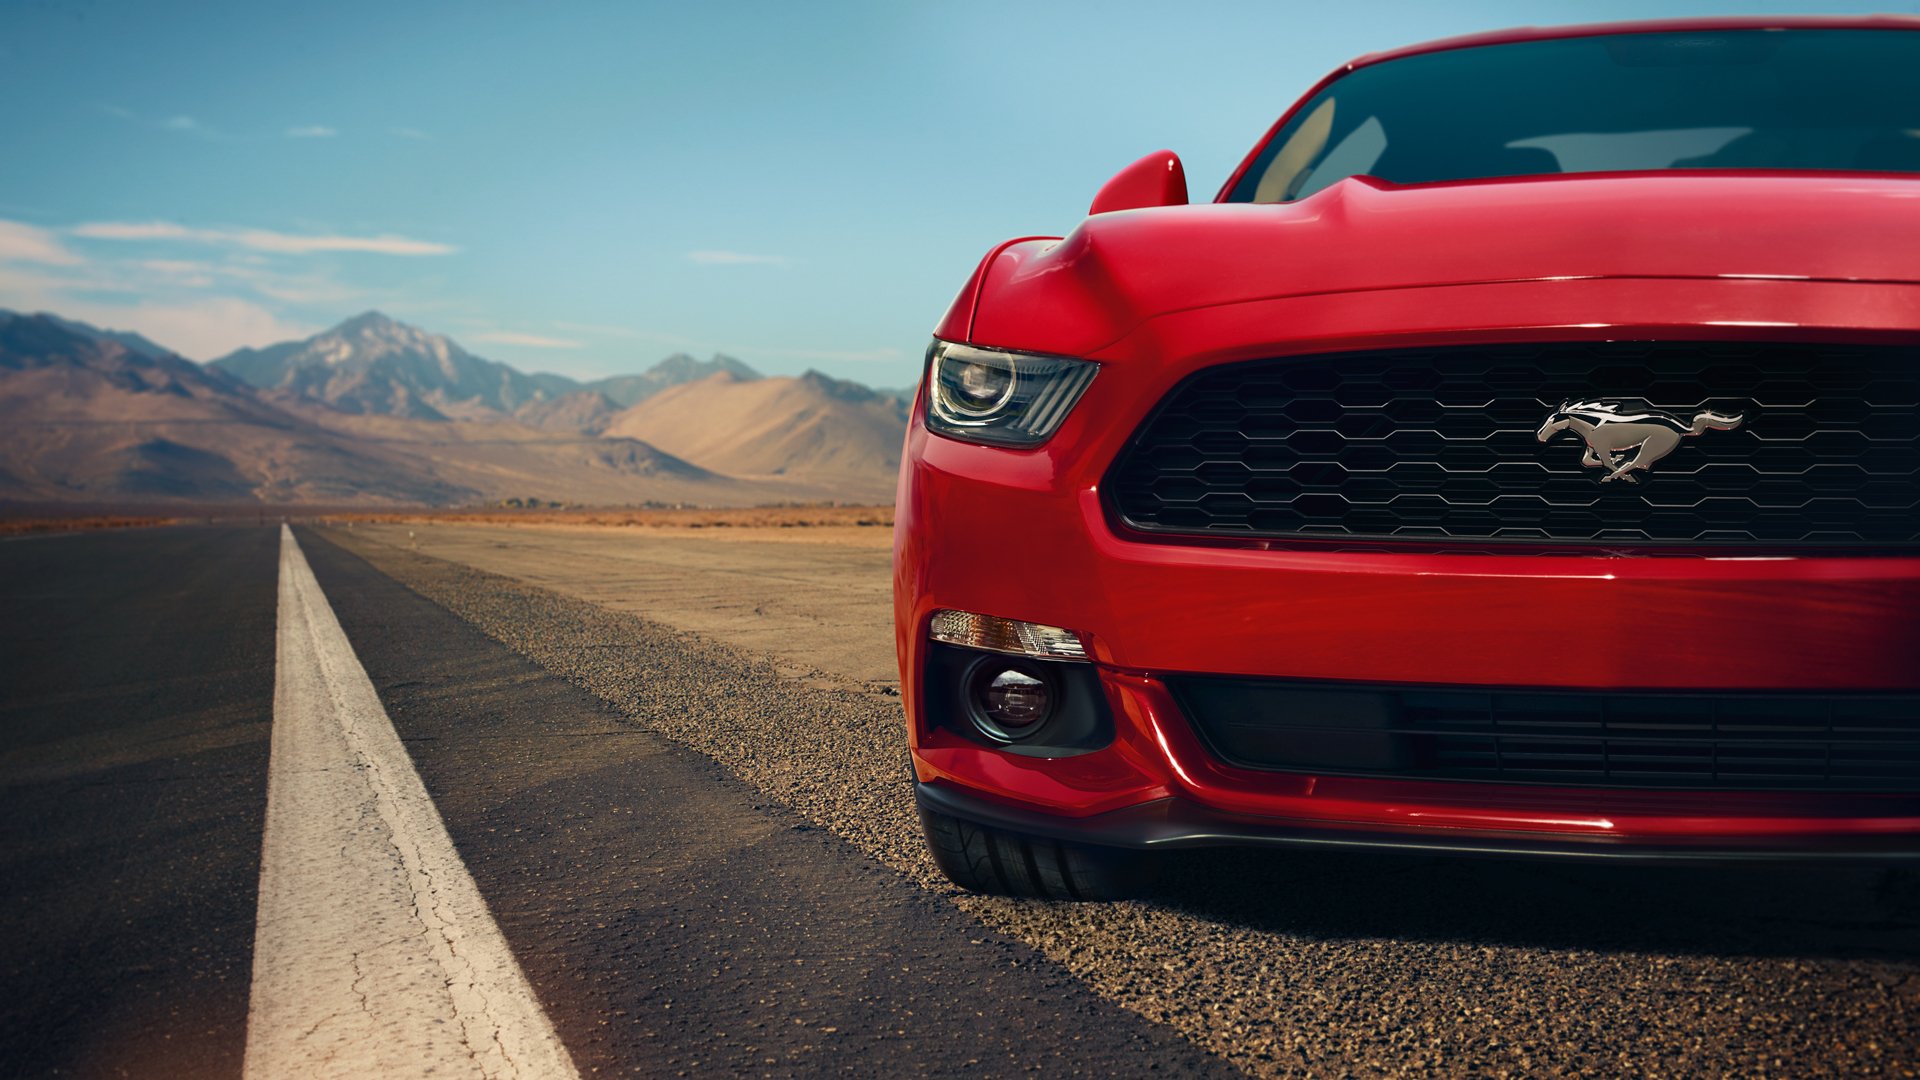 17 2015 Ford Mustang GT HD Wallpapers | Background Images ...
 2015 Ford Mustang Wallpaper Hd